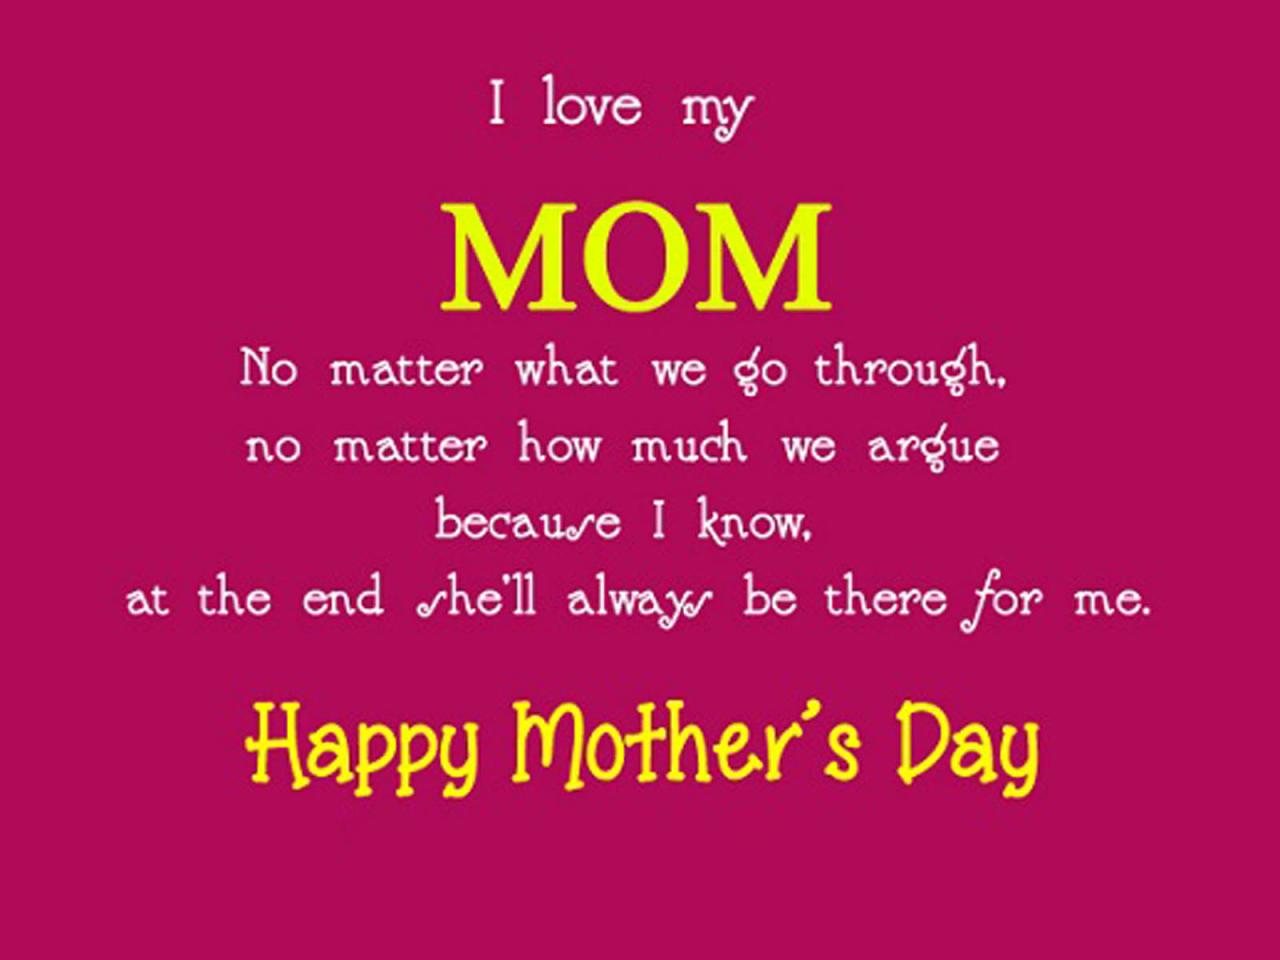 Poems mother mothers elma happy quotes mom twitter poem